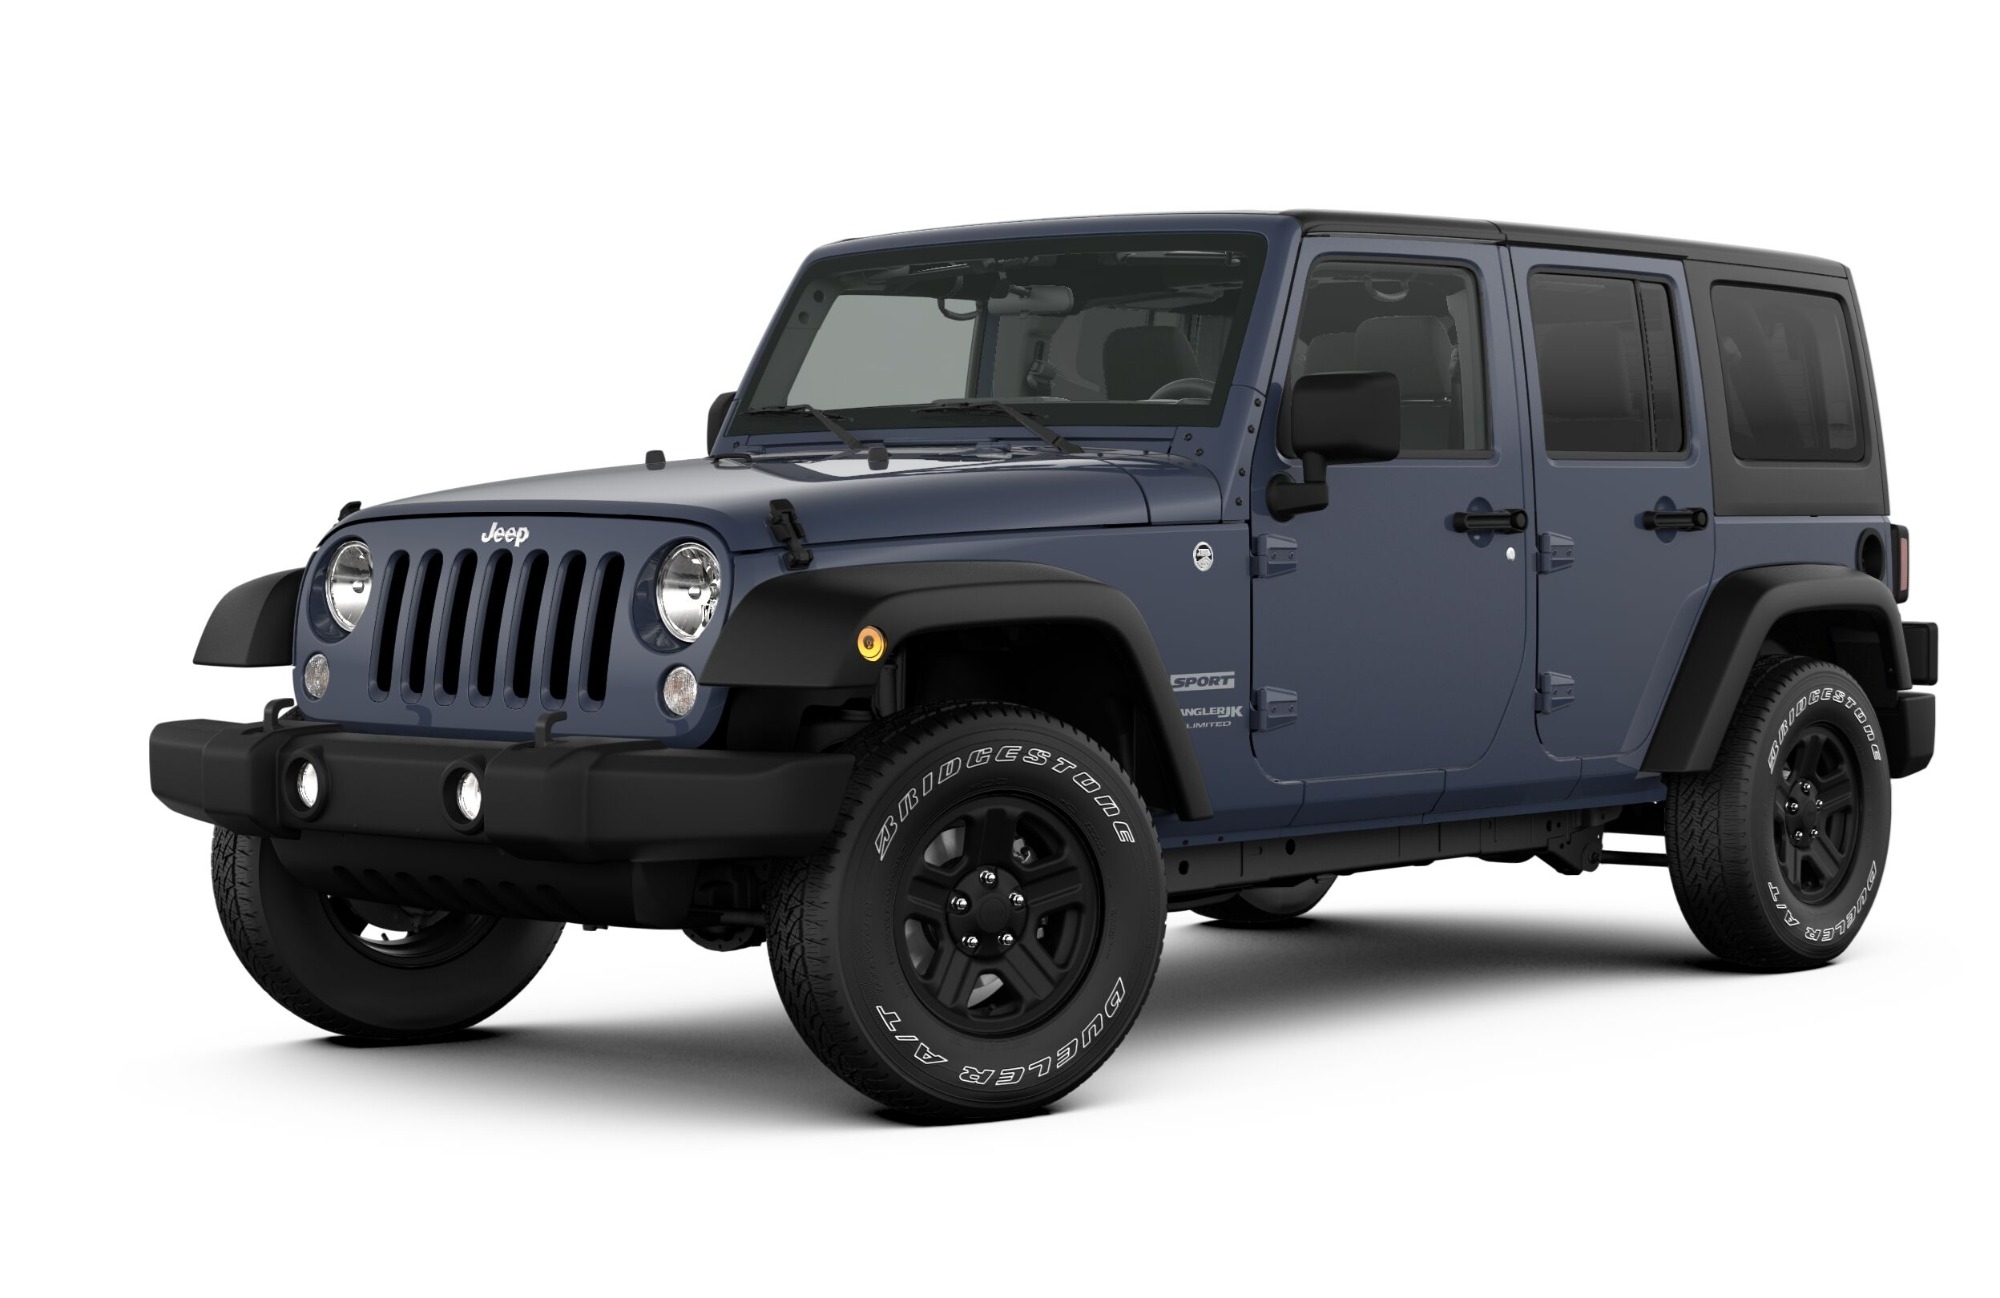 Jeep part. Jeep Wrangler Unlimited 2018. Jeep Wrangler JK Unlimited. 2018 Jeep Wrangler JK Unlimited. Джип Wrangler Unlimited.